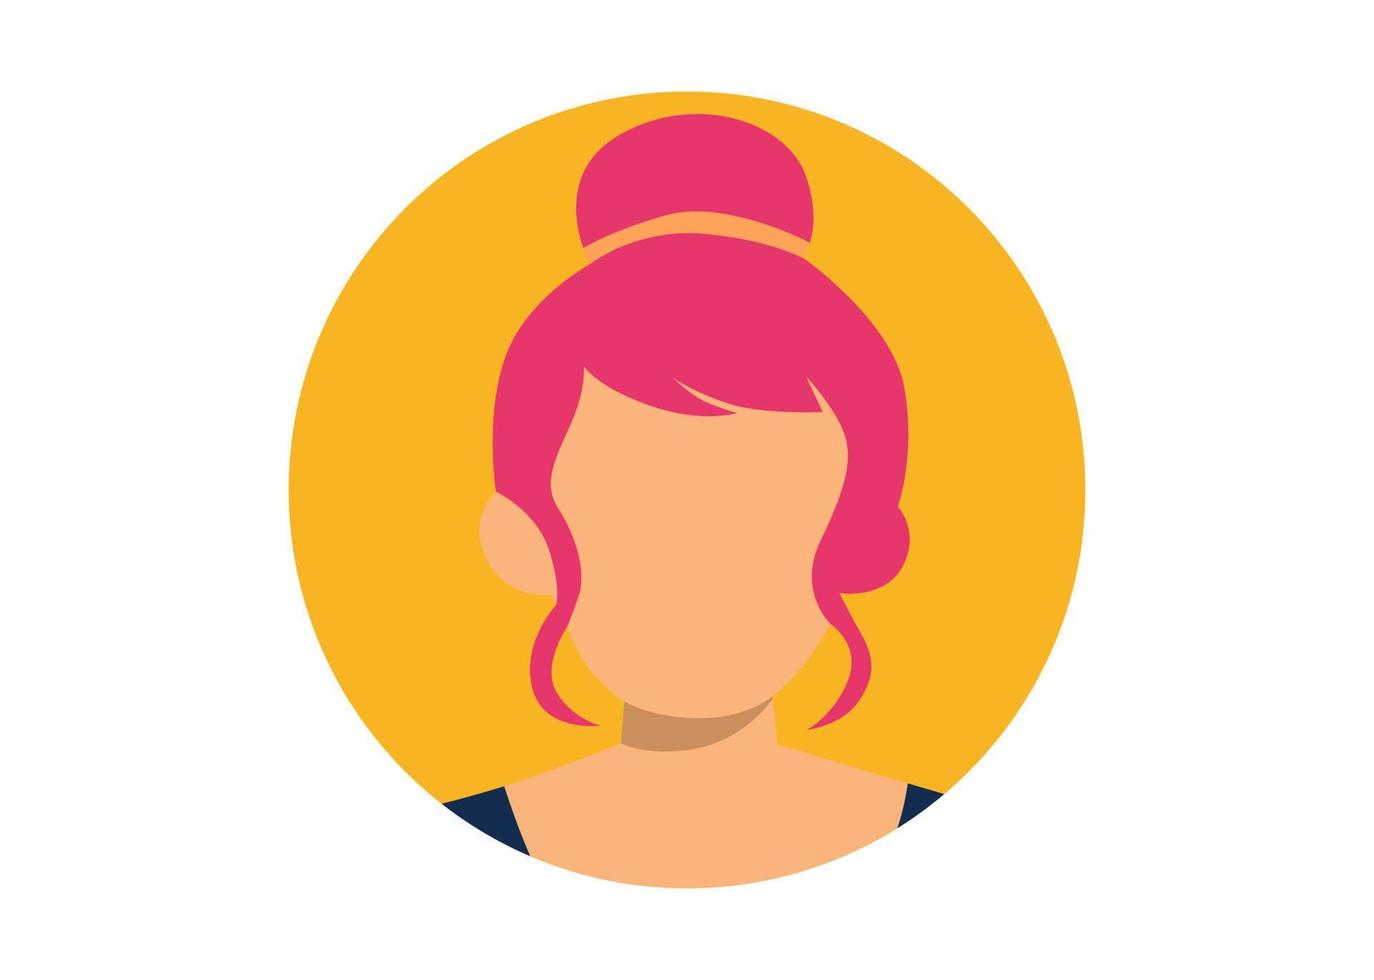 young girl face illustration design vector